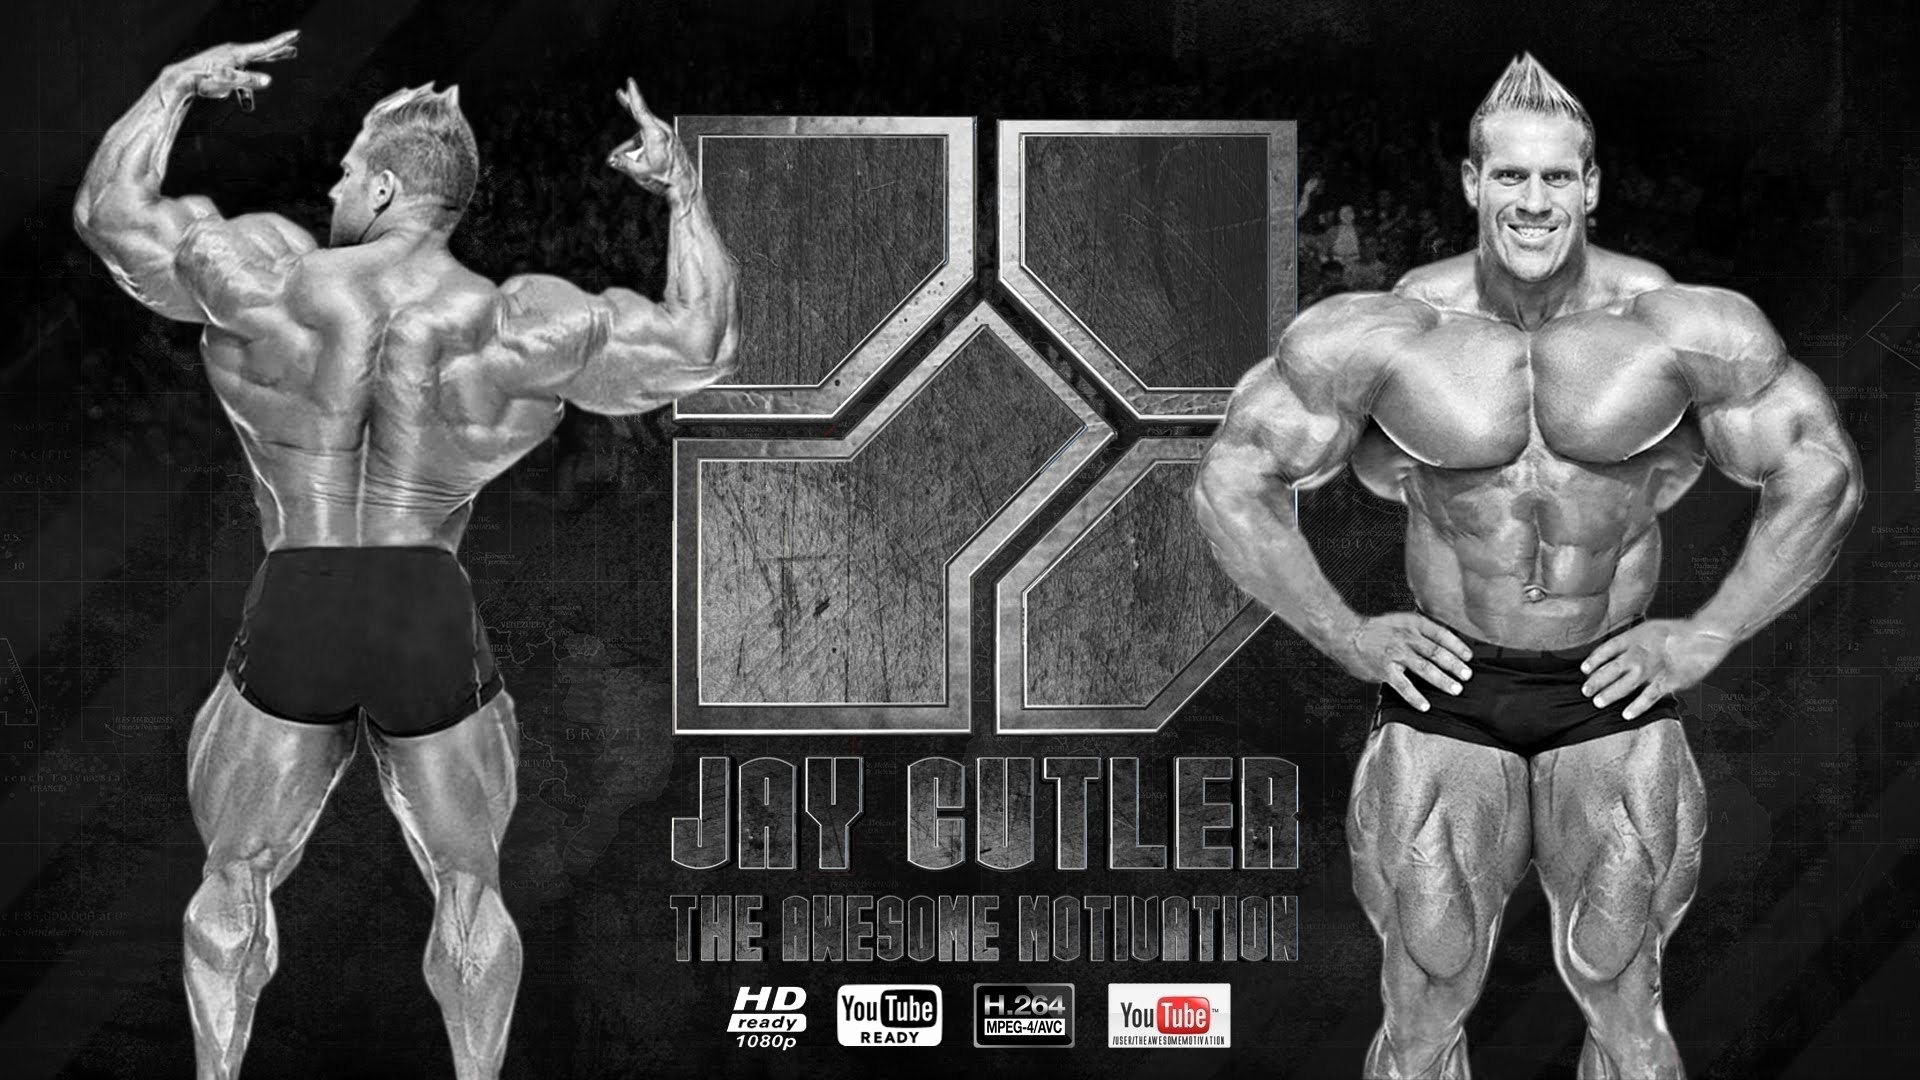 jay cutler hd wallpaper,bodybuilding,bodybuilder,muscle,physical fitness,arm